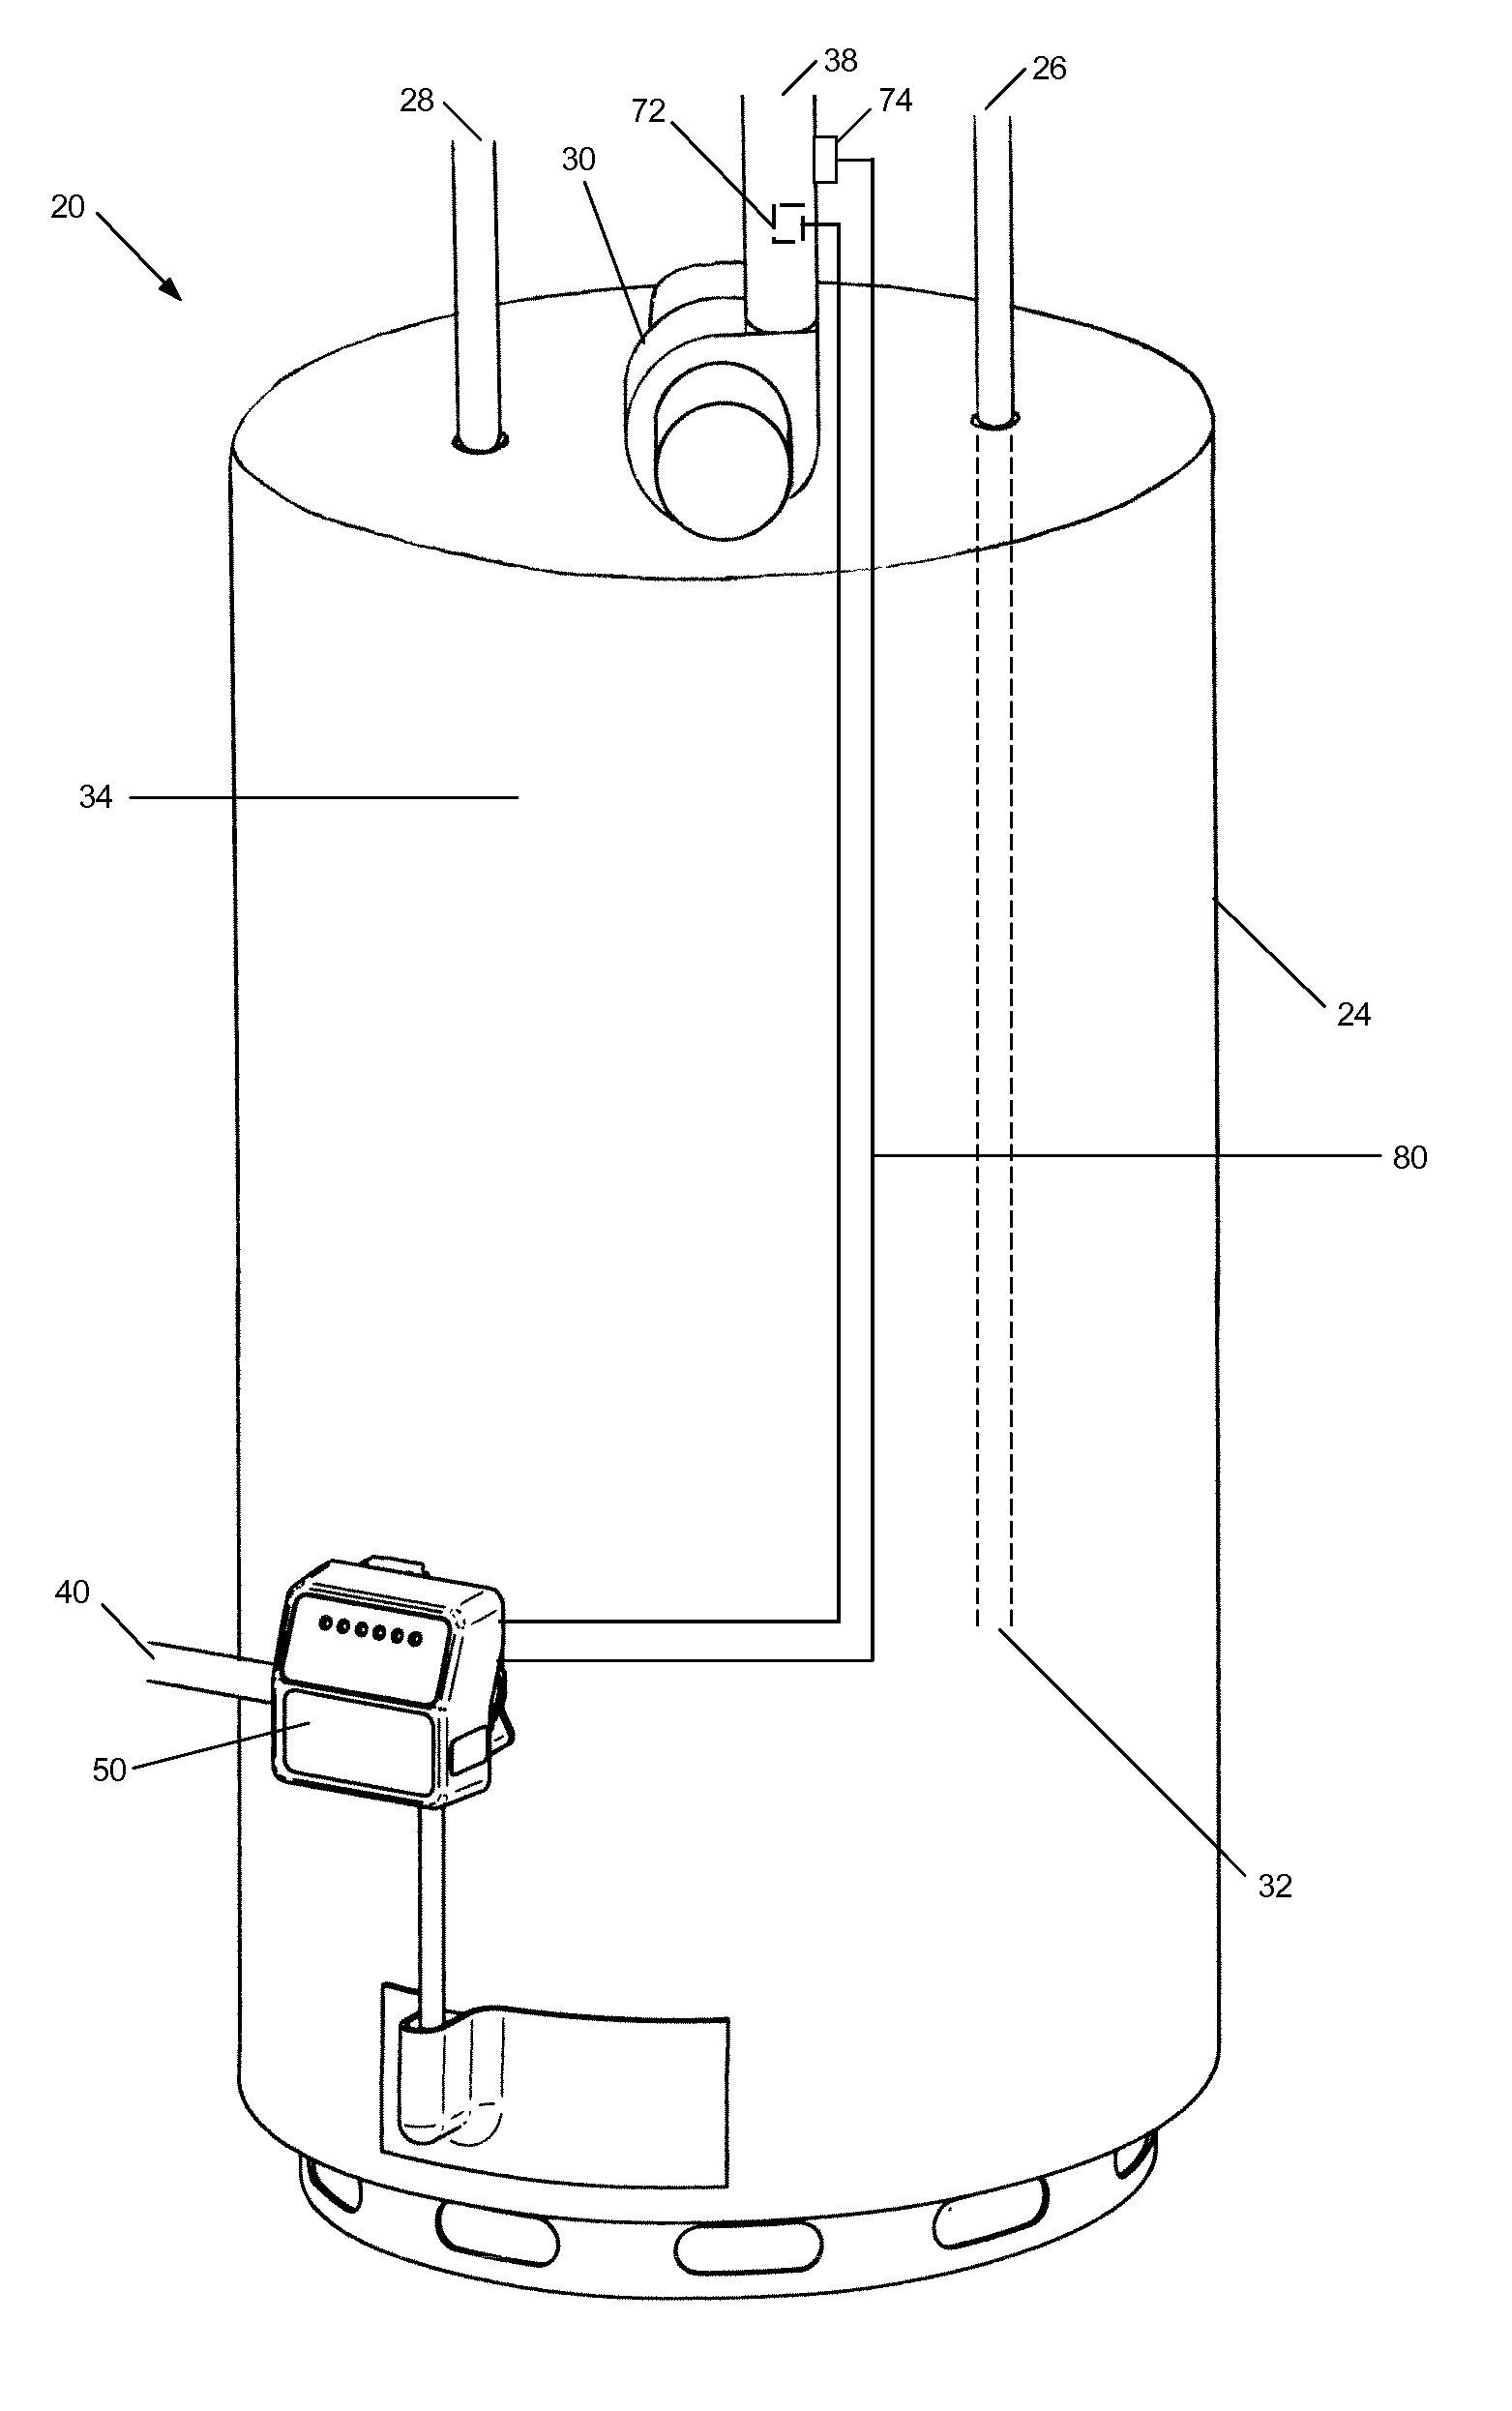 Systems and methods for controlling a water heater